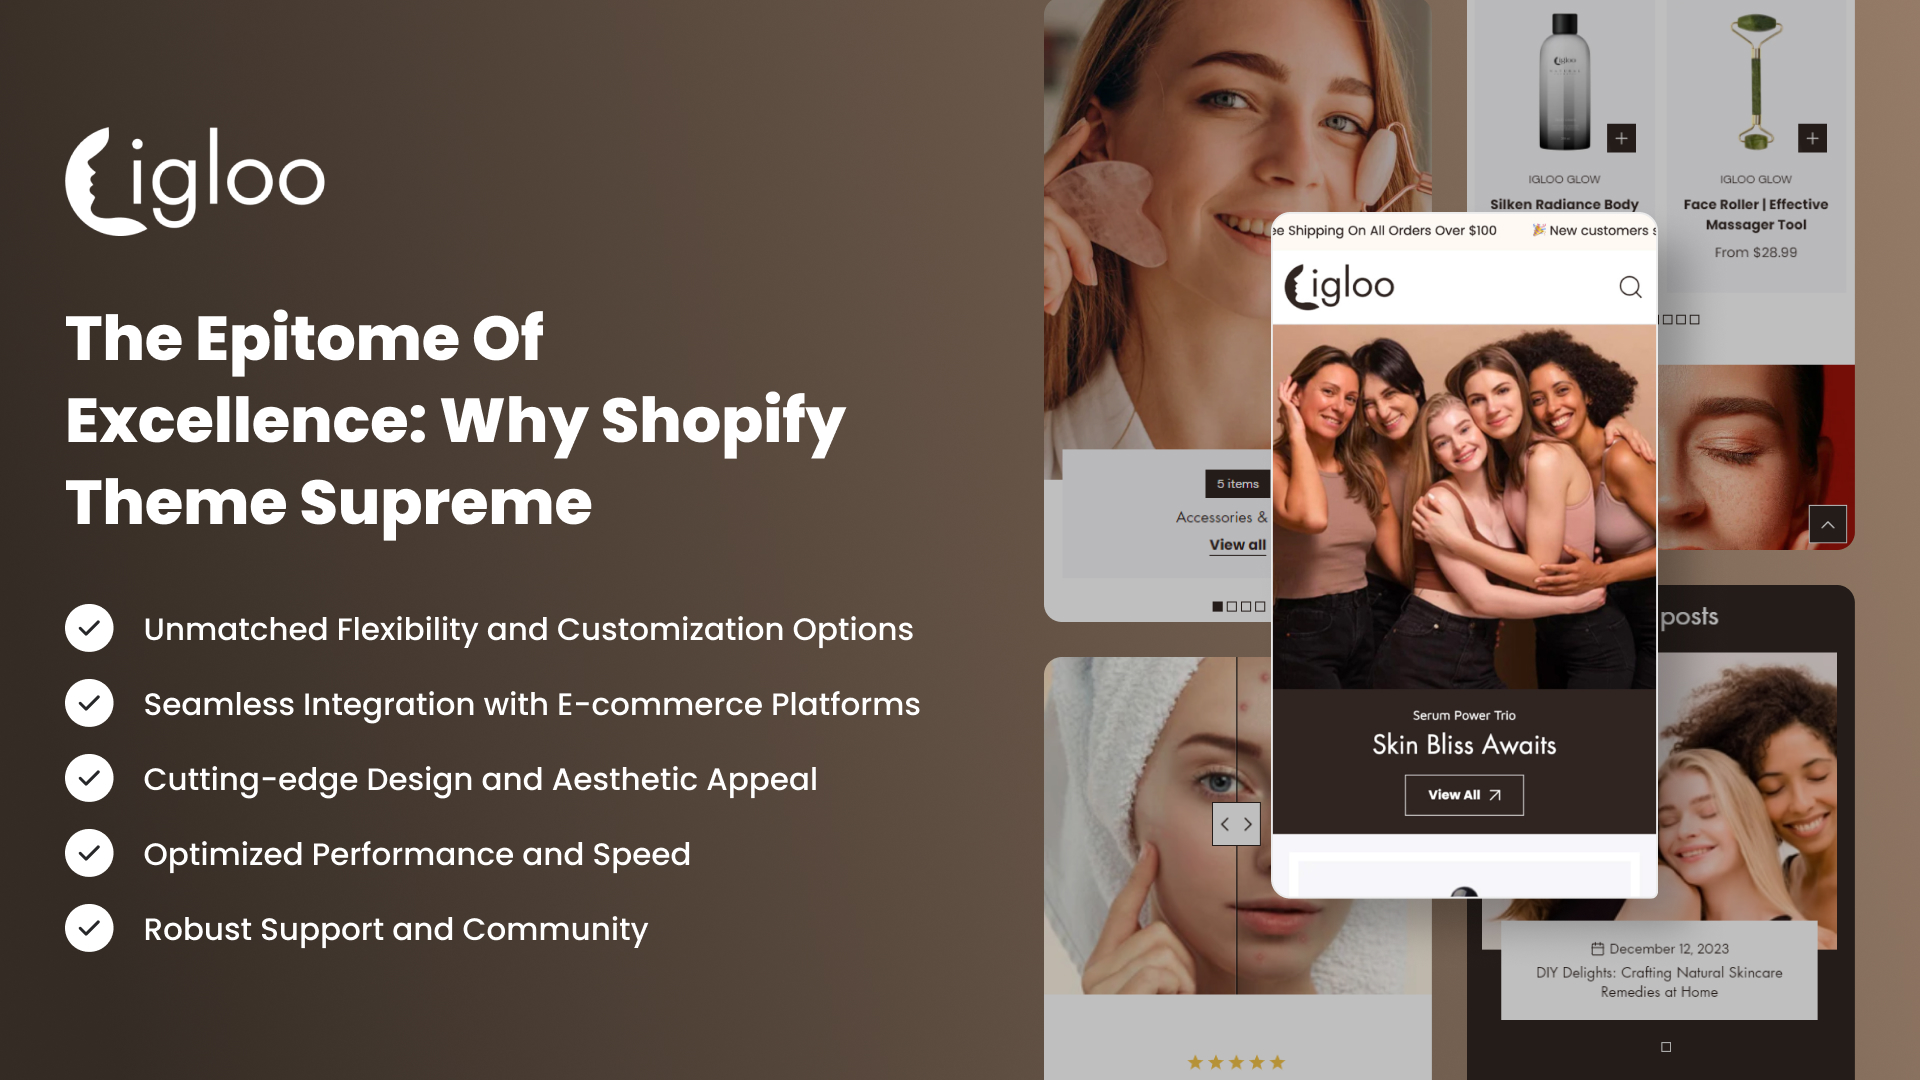 The Epitome of Excellence: Why Shopify Theme Supreme